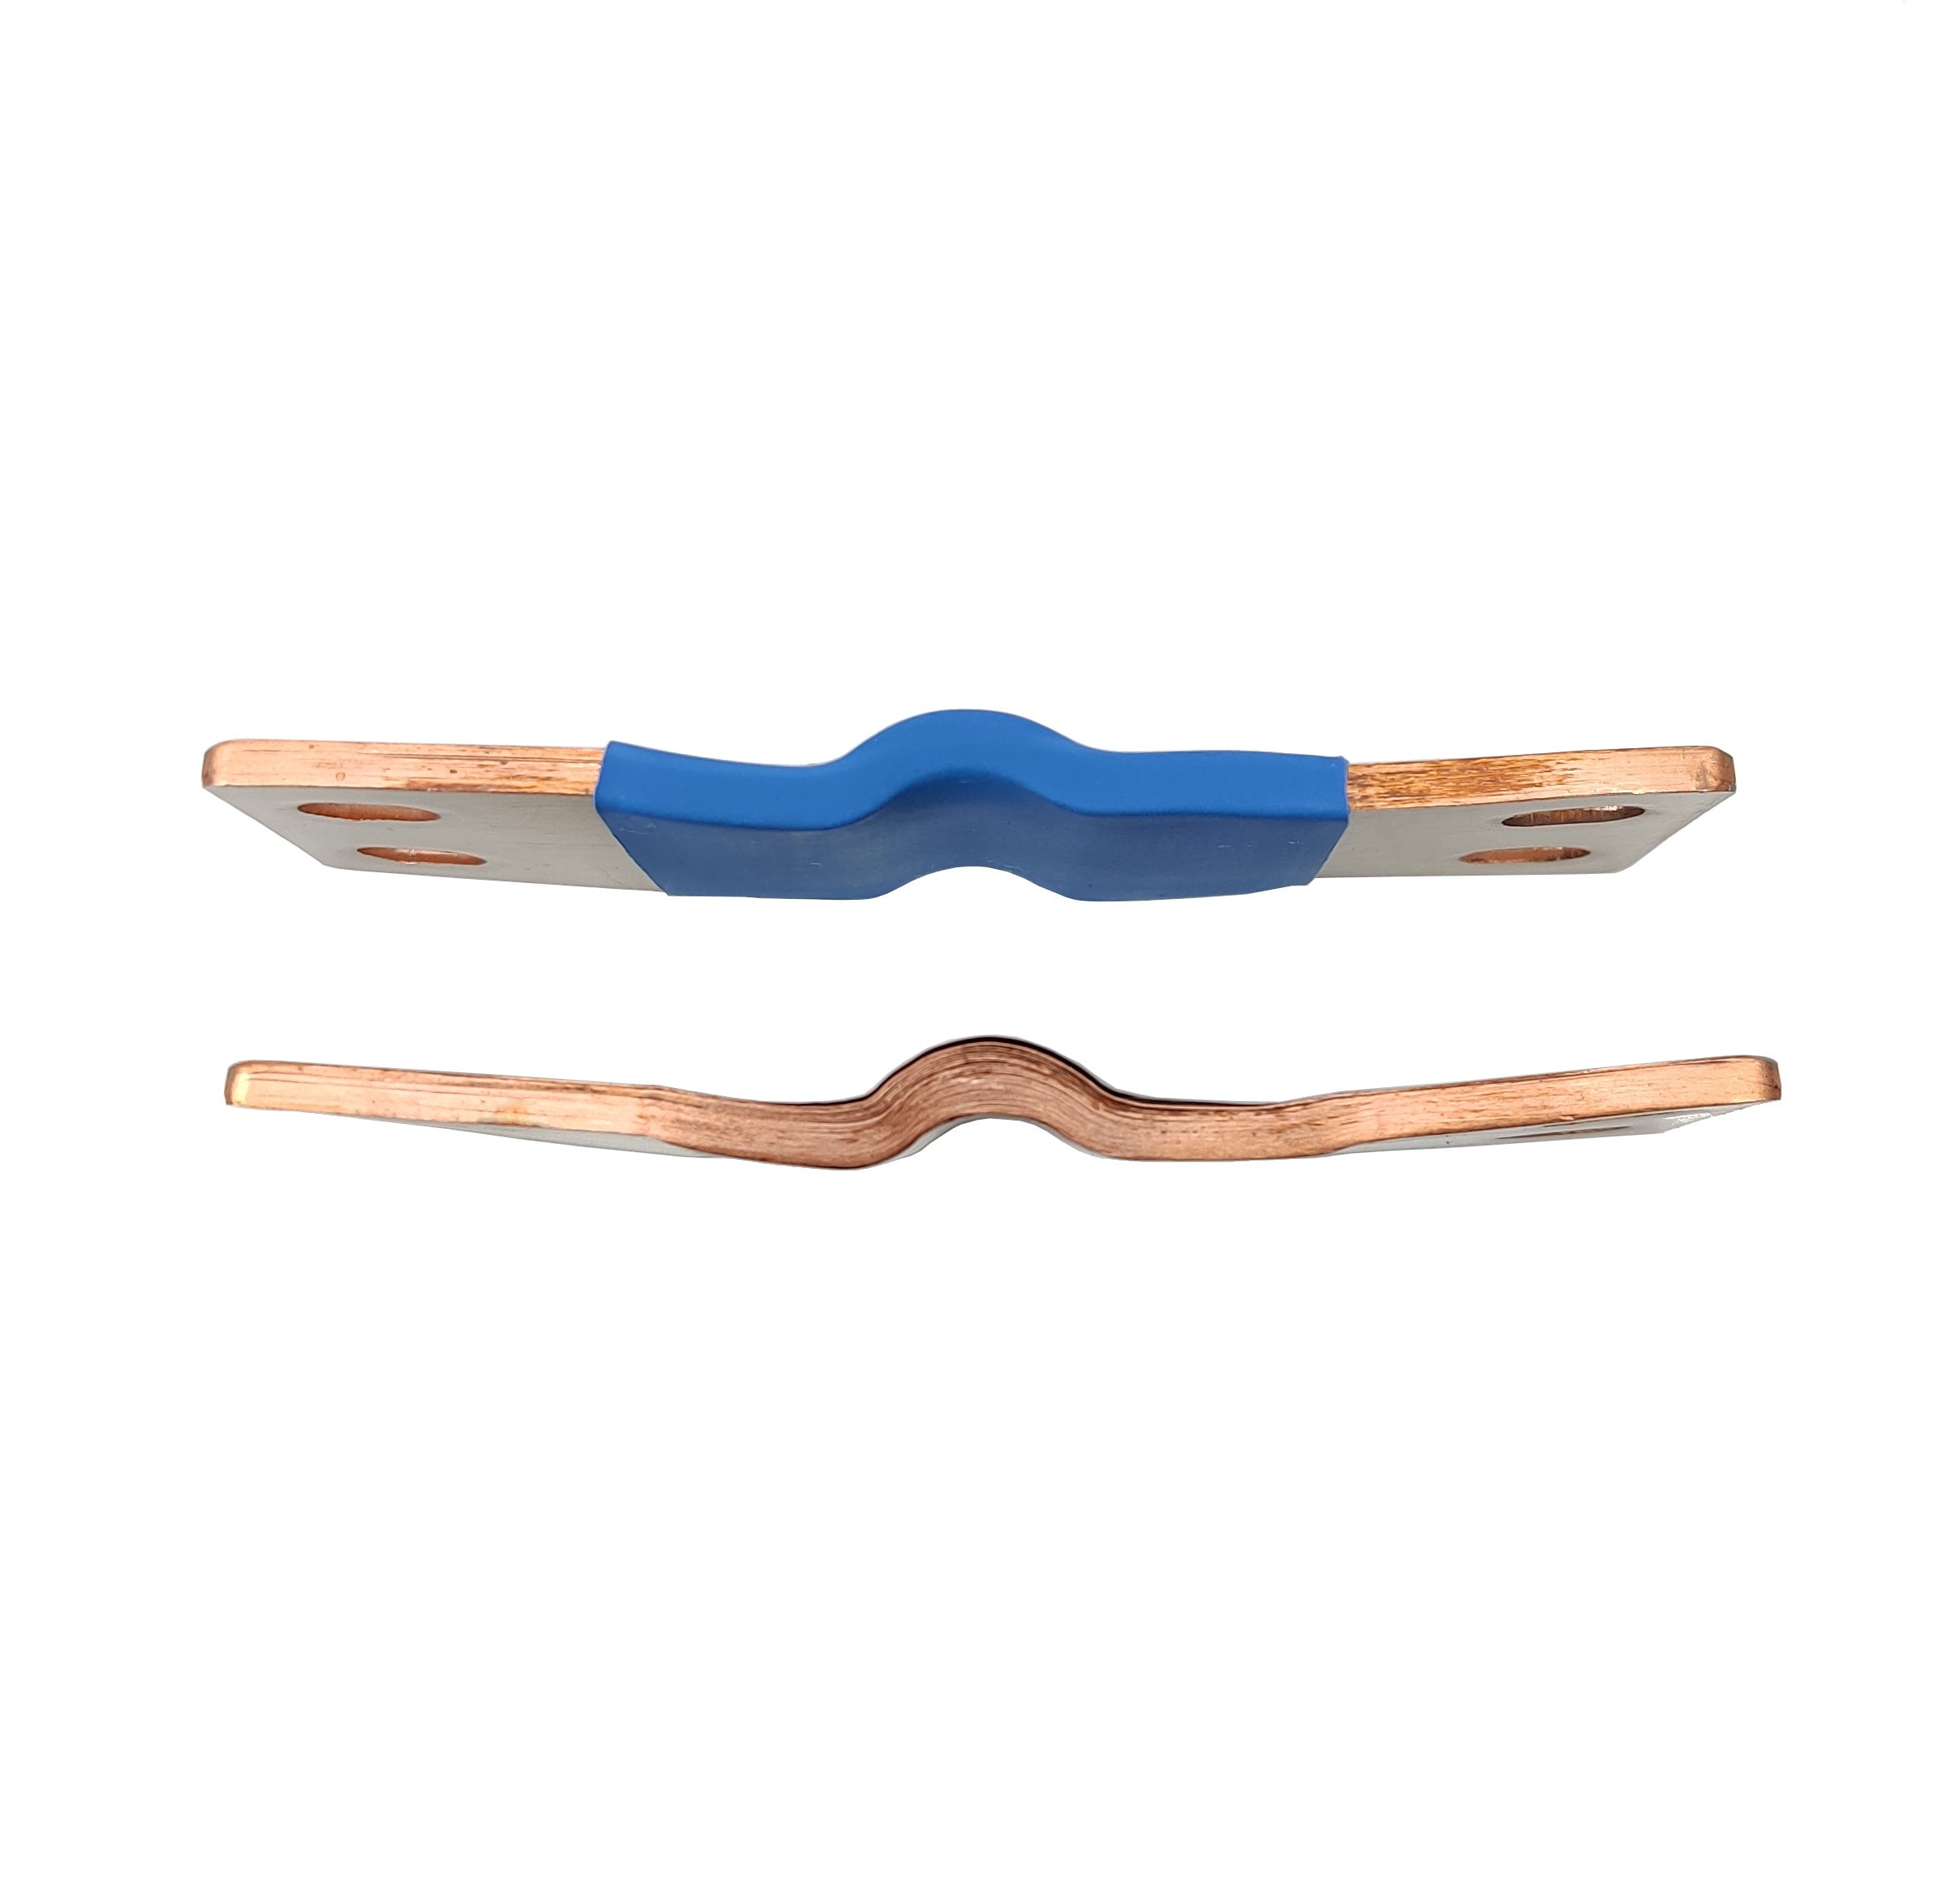 0% VAT copper connector 84mm with the finest flexible copper levels